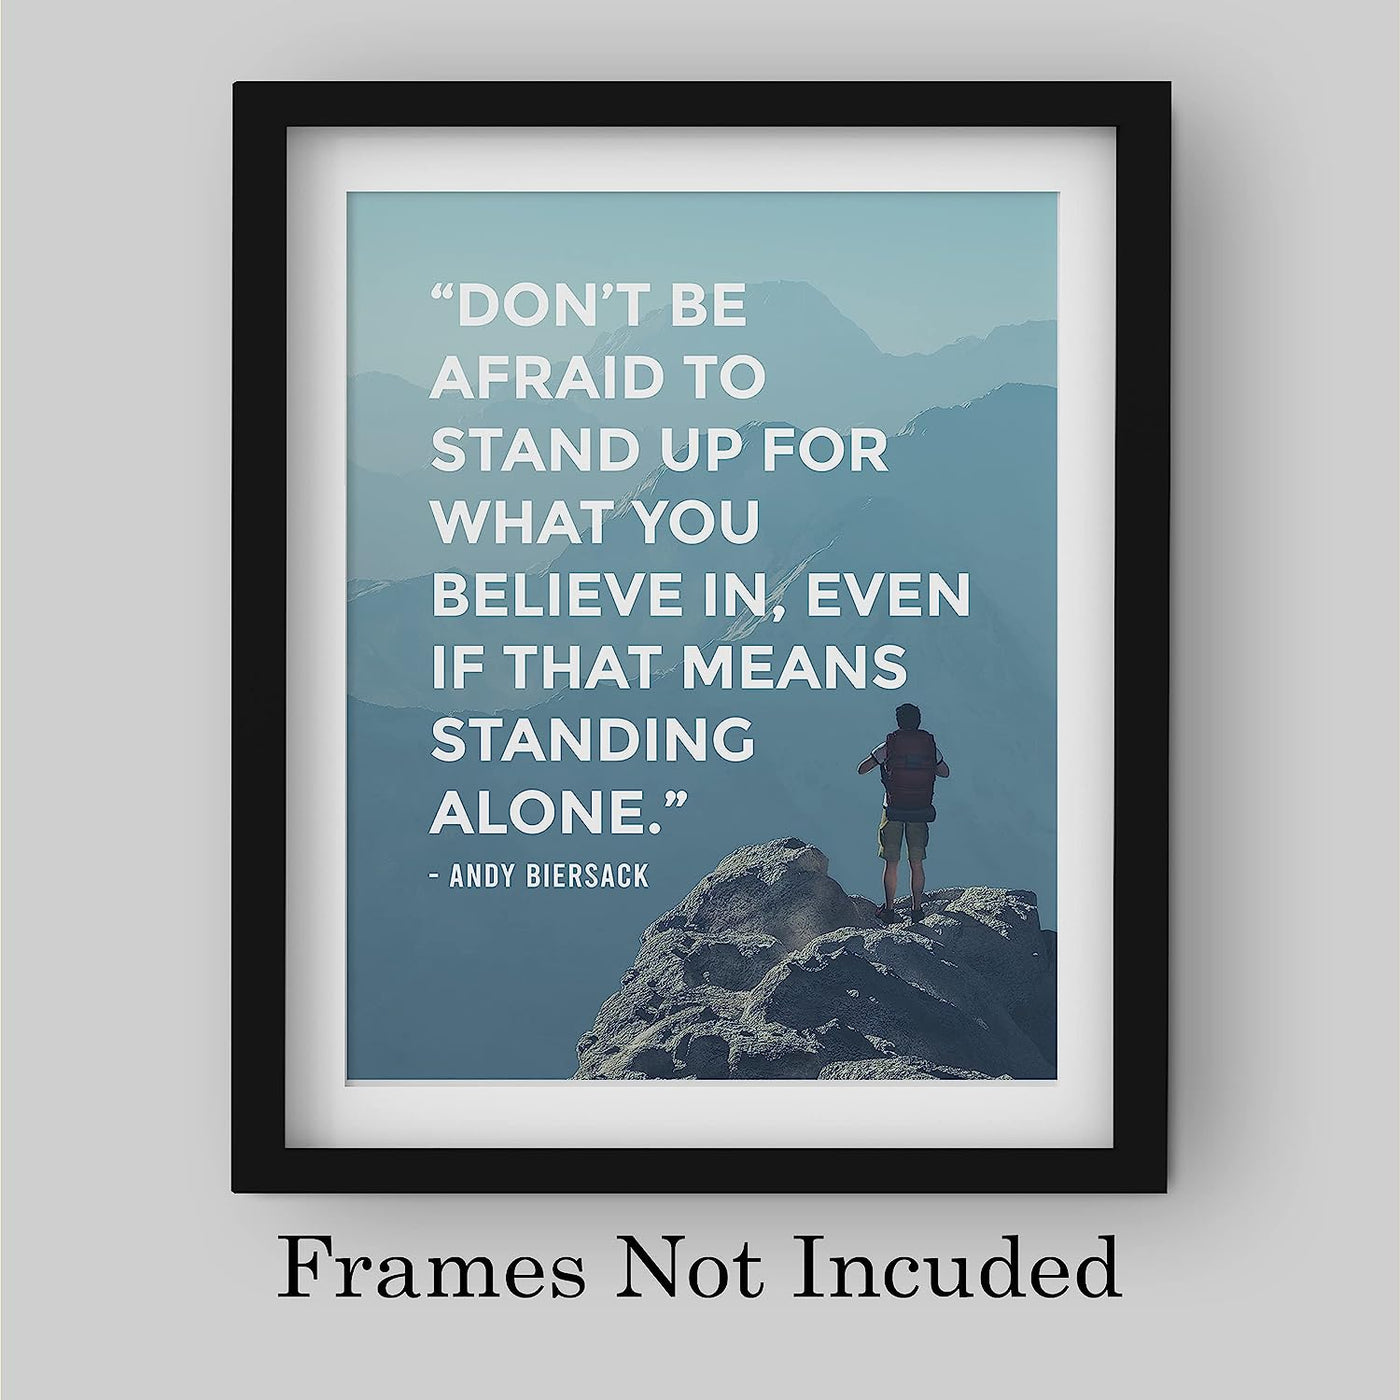 Don't Be Afraid to Stand Up For What You Believe In Inspirational Wall Art -8 x 10" Motivational Photo Print w/Mountains-Ready to Frame. Home-Office-School Decor. Great Sign for Inspiration!